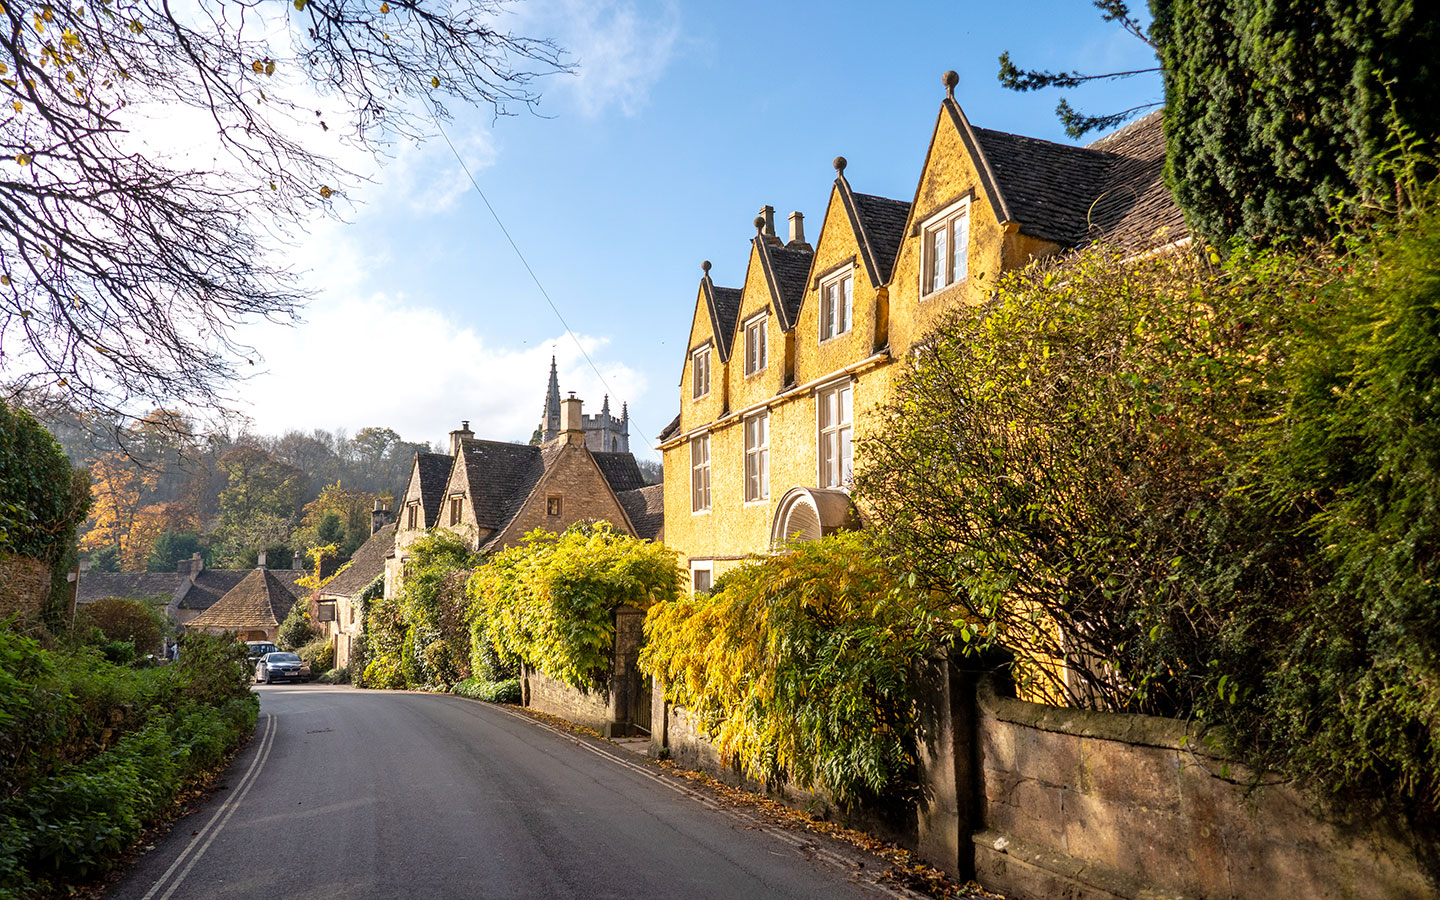 The road from Upper to Lower Castle Combe in the Cotswolds